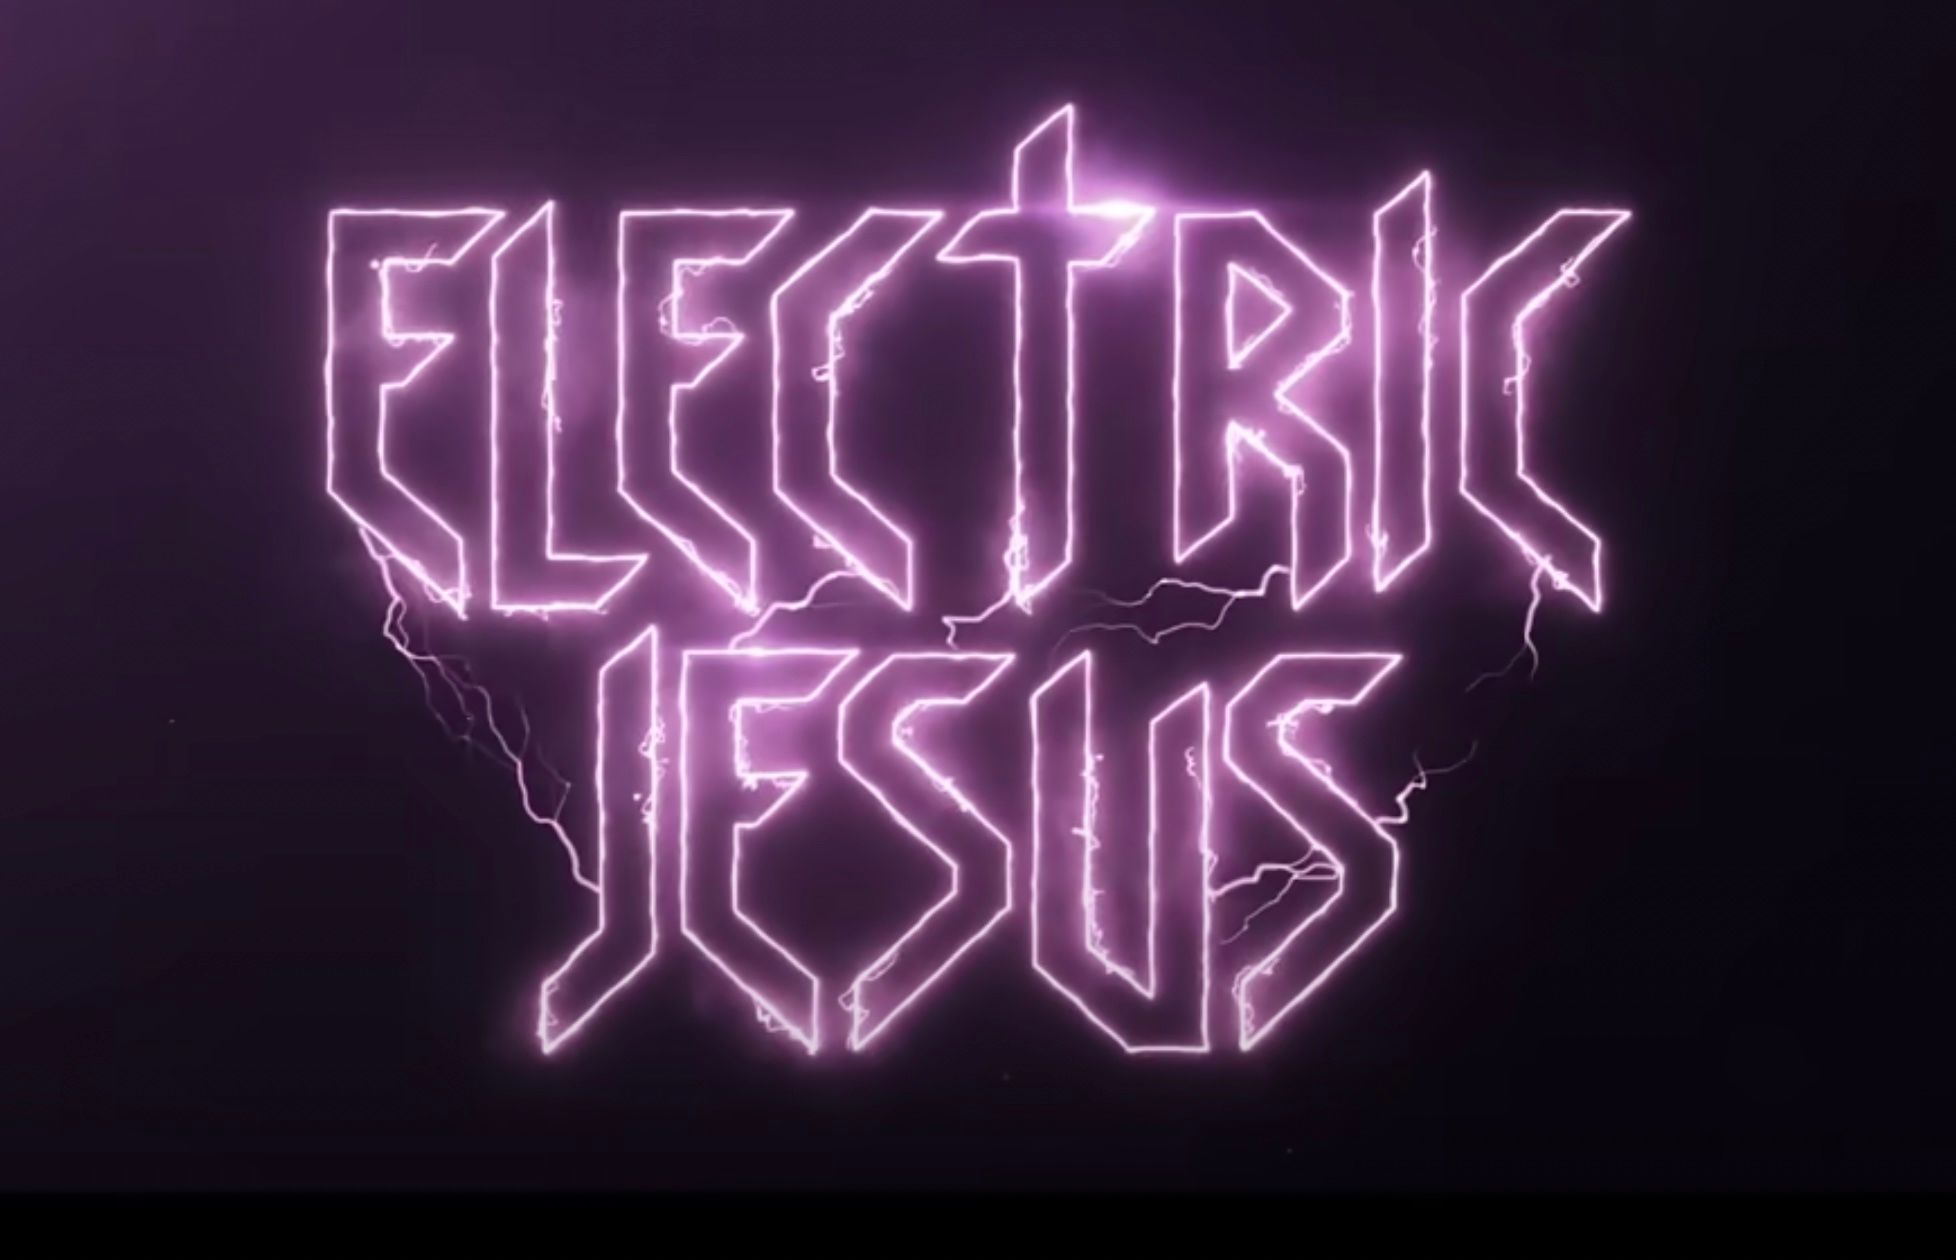 Electric Jesus: See the Trailer for This Fun, Nostalgia Trip to 80's Christian Rock'n'Roll